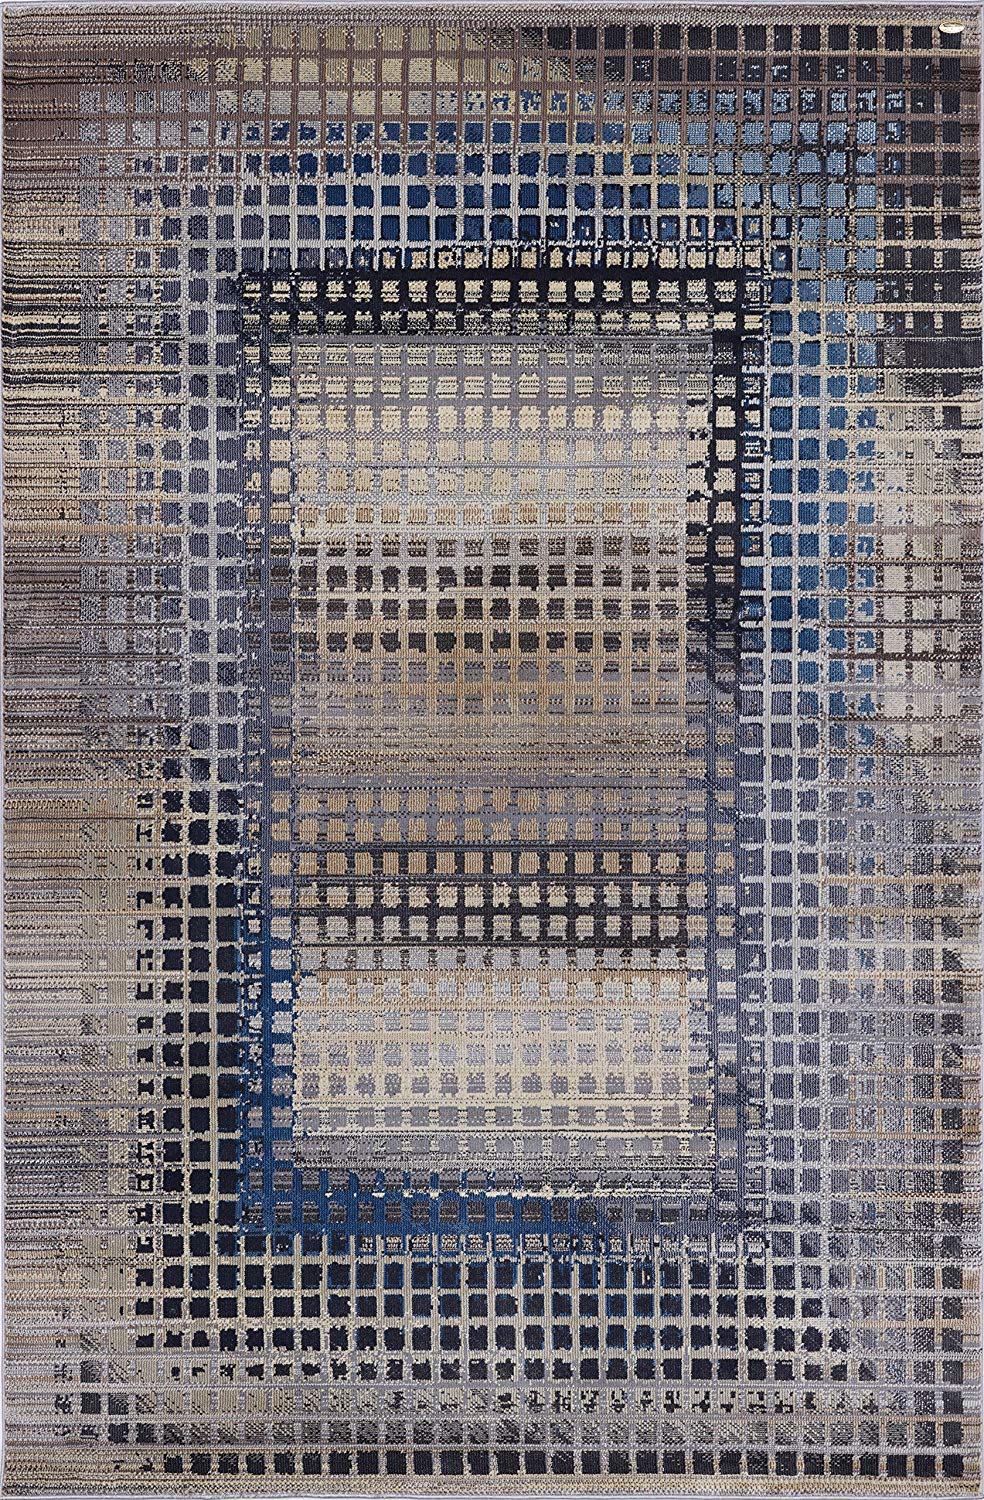 https://pierrecardinrugs.com/cdn/shop/products/area_rugs_8x10_area_rug_5x7_5x8_blue_luxury_bedroom_8x10_clearance_living_room_vintage_gray_grey_traditional_bohemian_kitchen_rugs_for_bedroom_living_room_abstract_rugs_area_patterns_o_1_01ebd76d-d6b2-4fa6-96ac-1657964c3412.jpg?v=1530885291